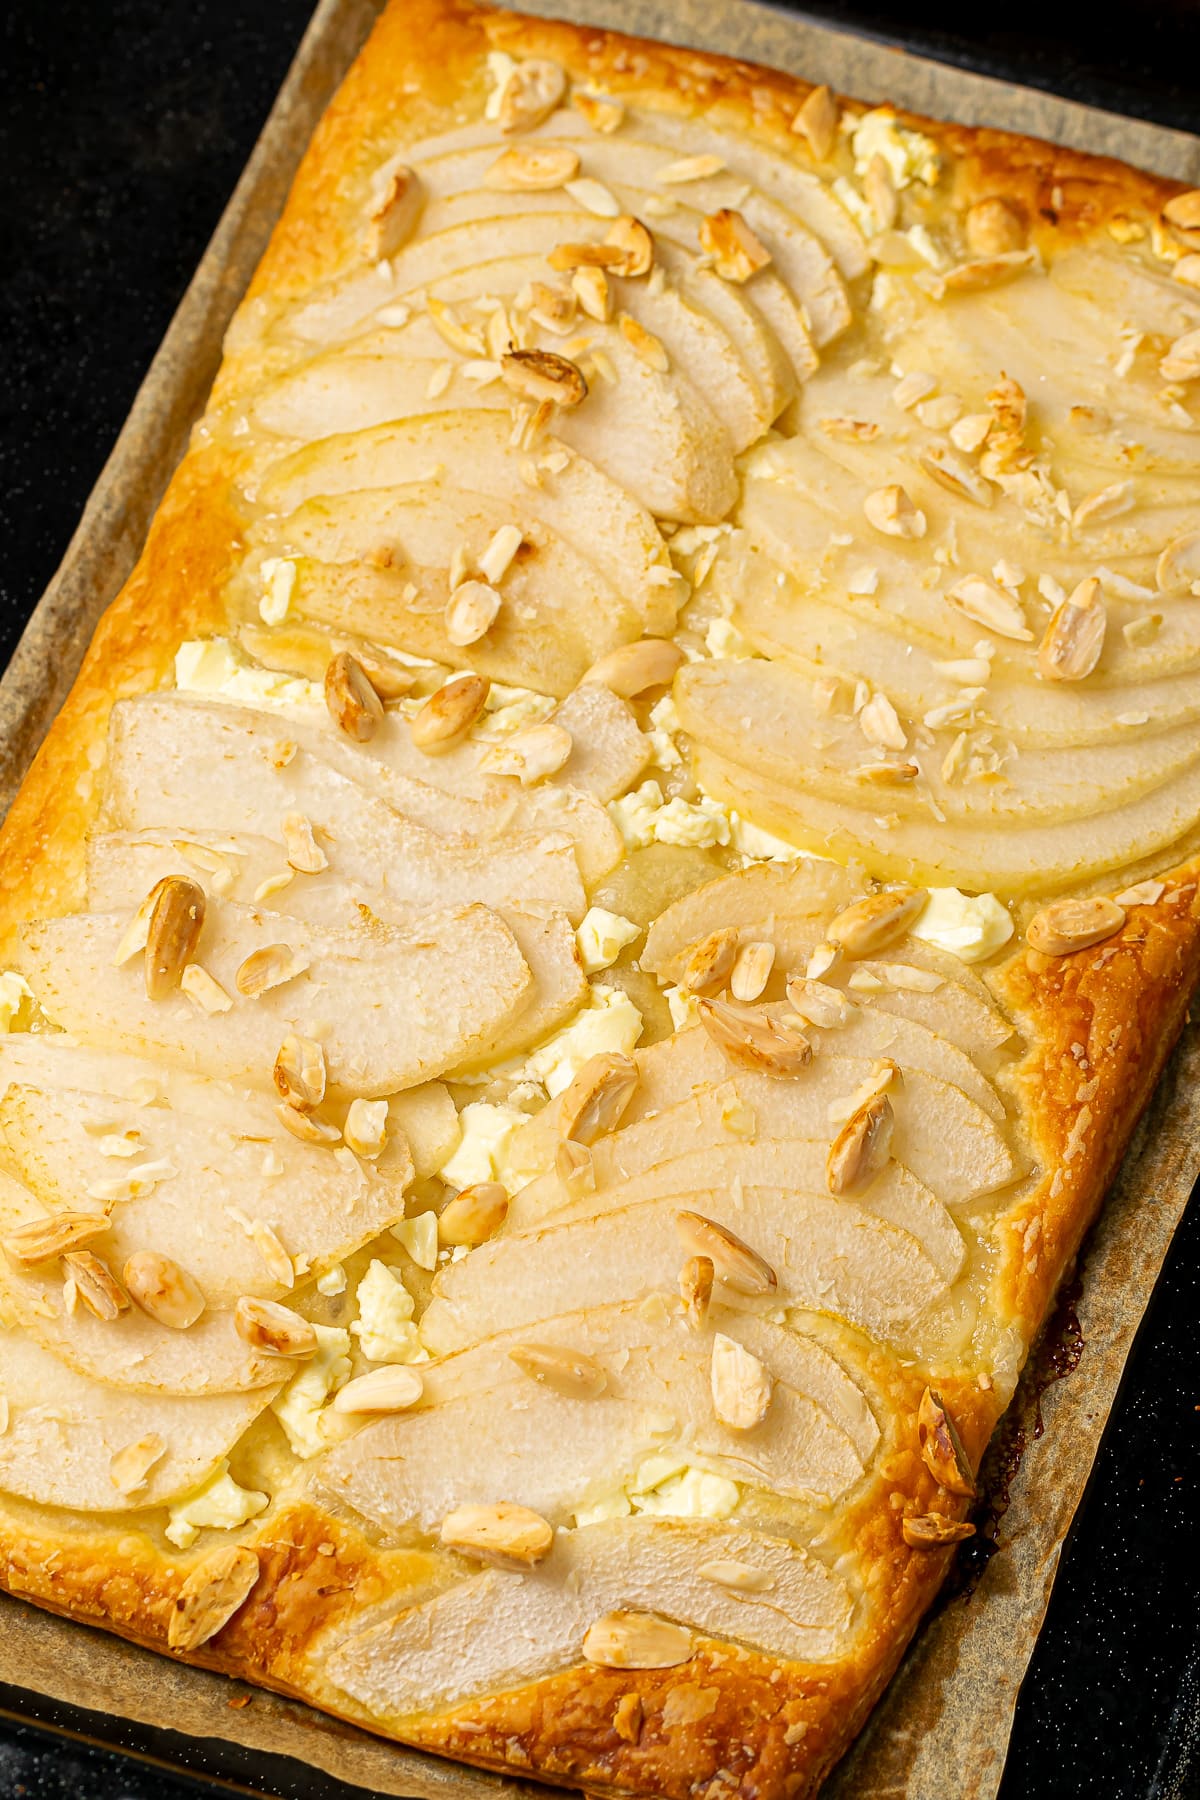 Baked pear and feta tart with almonds, golden brown and crisp, fresh out of the oven.